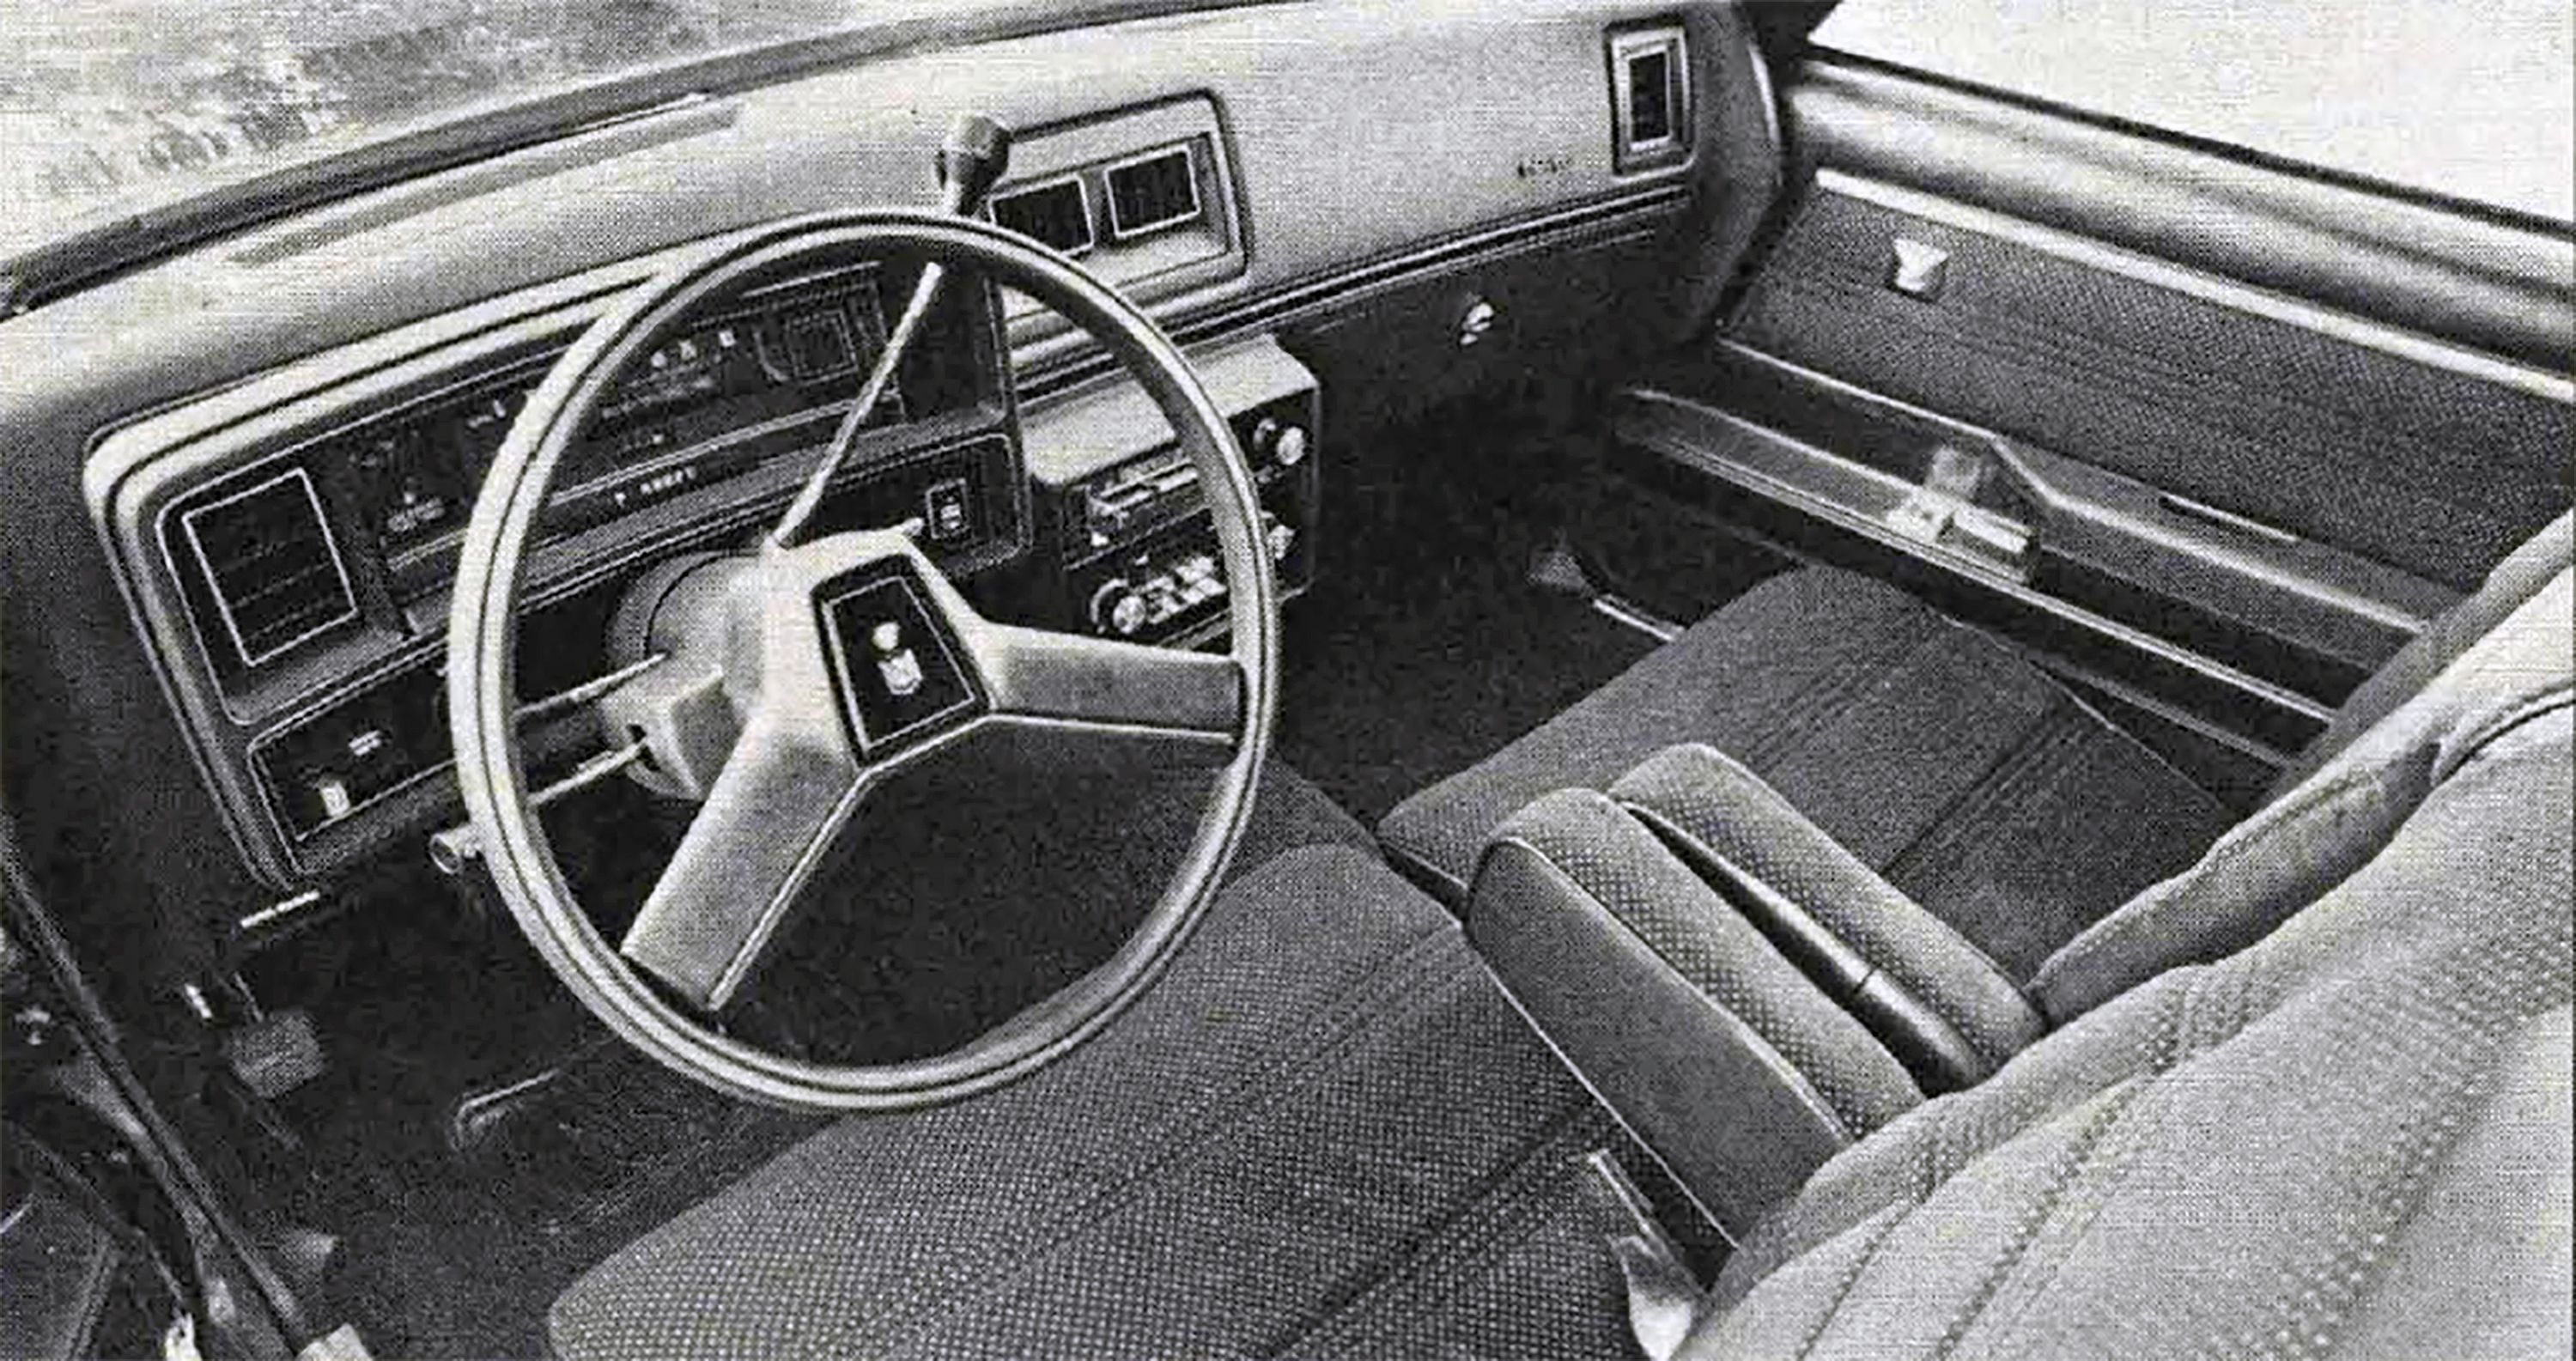 From the Archive: 1980 Chevrolet Malibu Classic